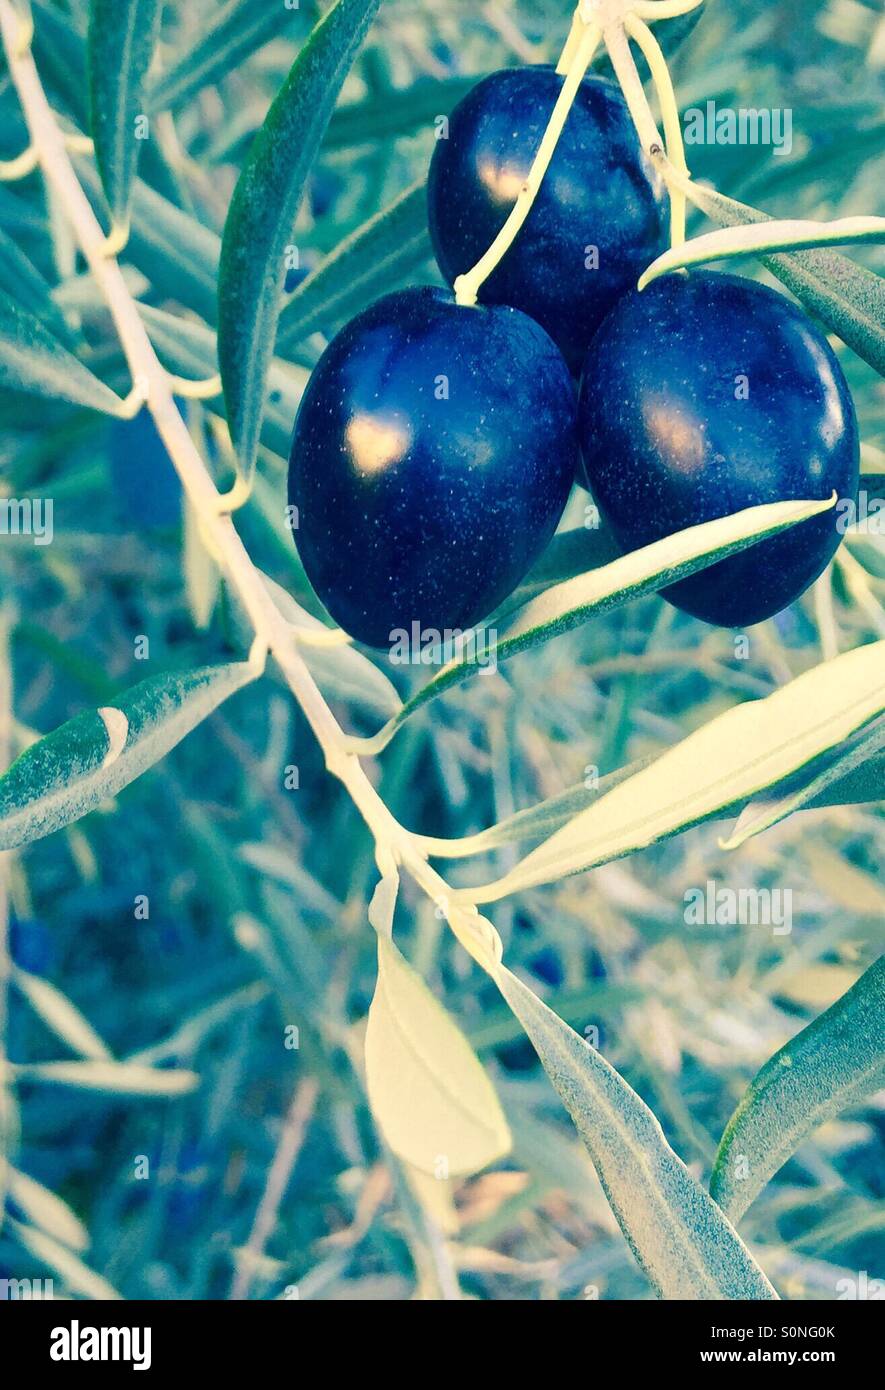 Olives on a tree bathing in the hot European sun. Stock Photo